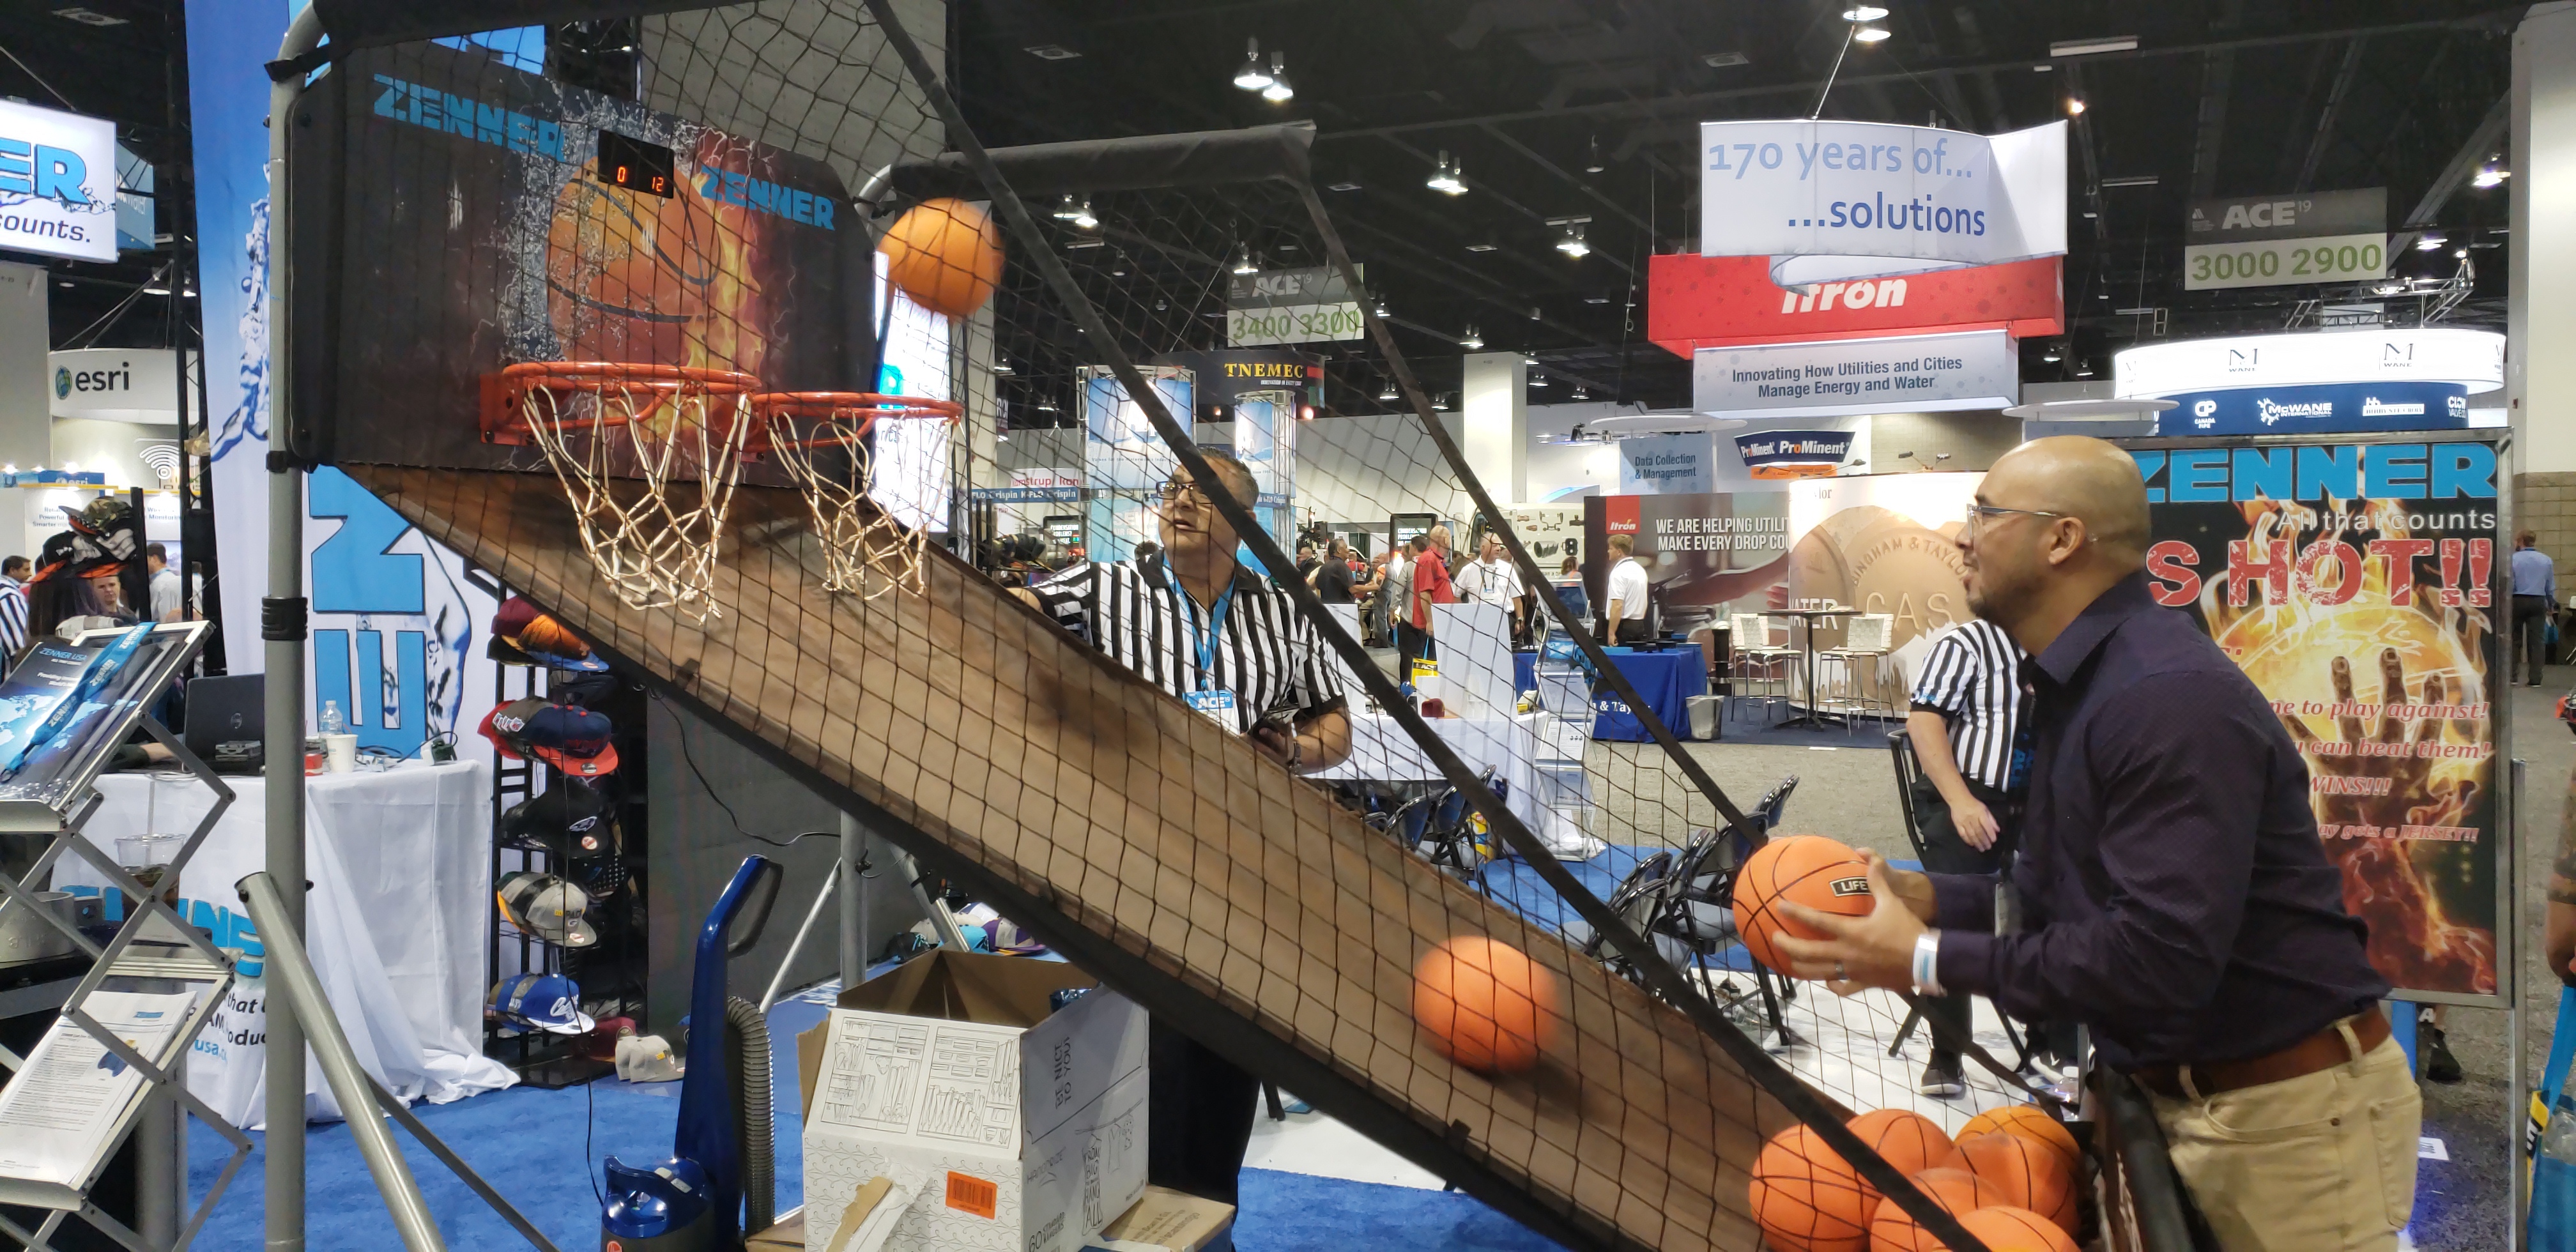 A man shoots small basketballs at two hoops on a crowded exhibit floor.